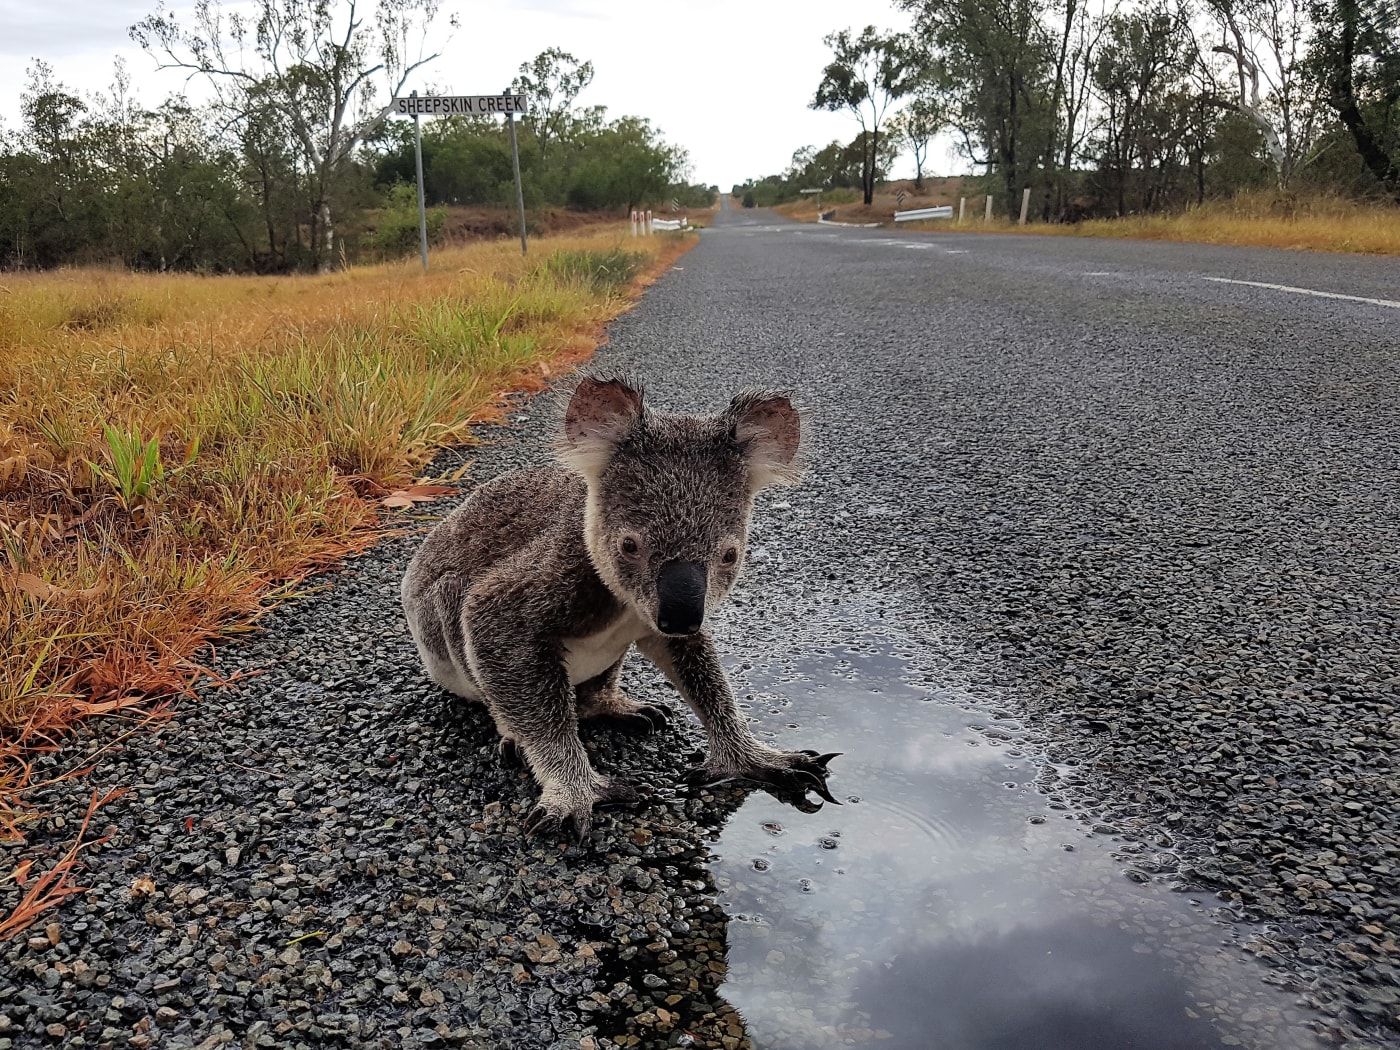 This koala was spotted having a drink on the Marlborough-Sarina Road in Central Queensland (near Mackay).